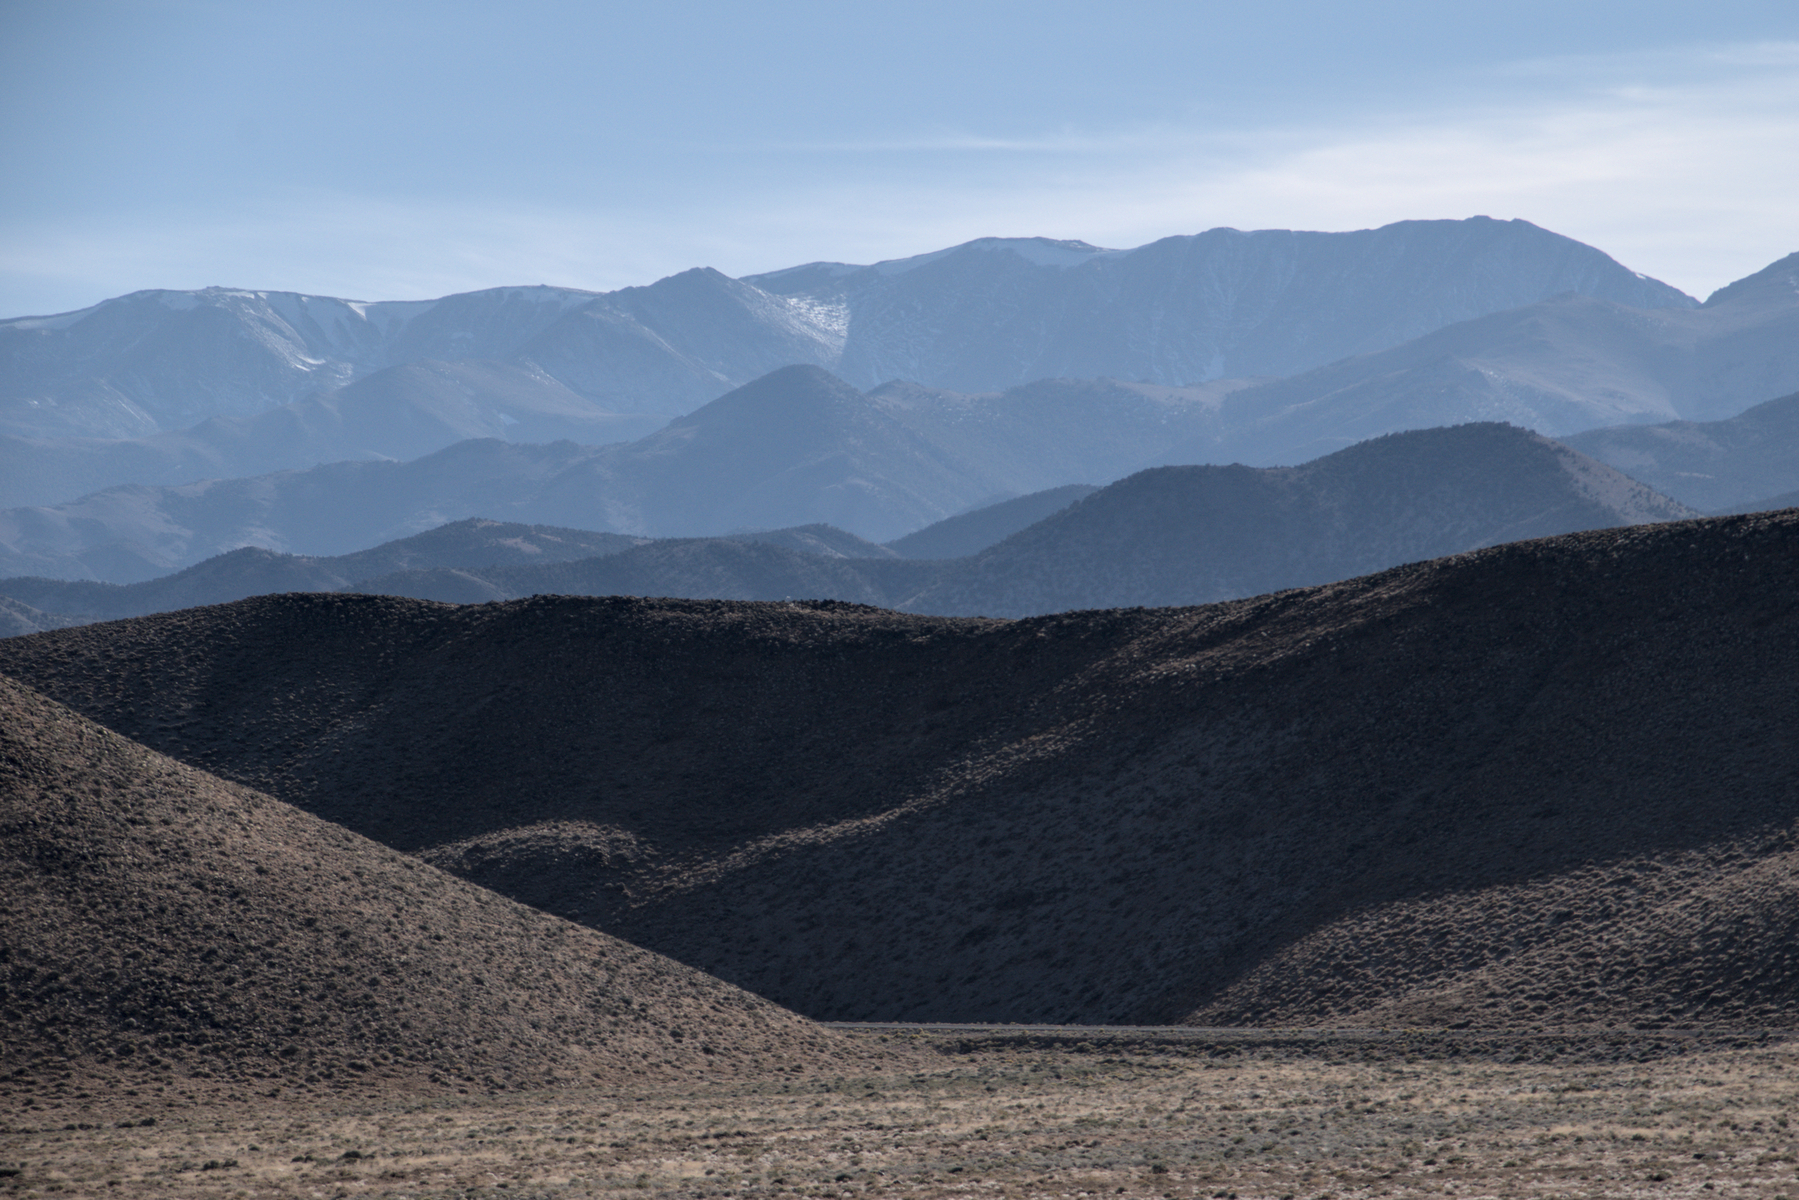 The view changes from desert floor to high mountains, with layers of foothills in between.  The further you look, the paler each range is, as light is scattered by haze.